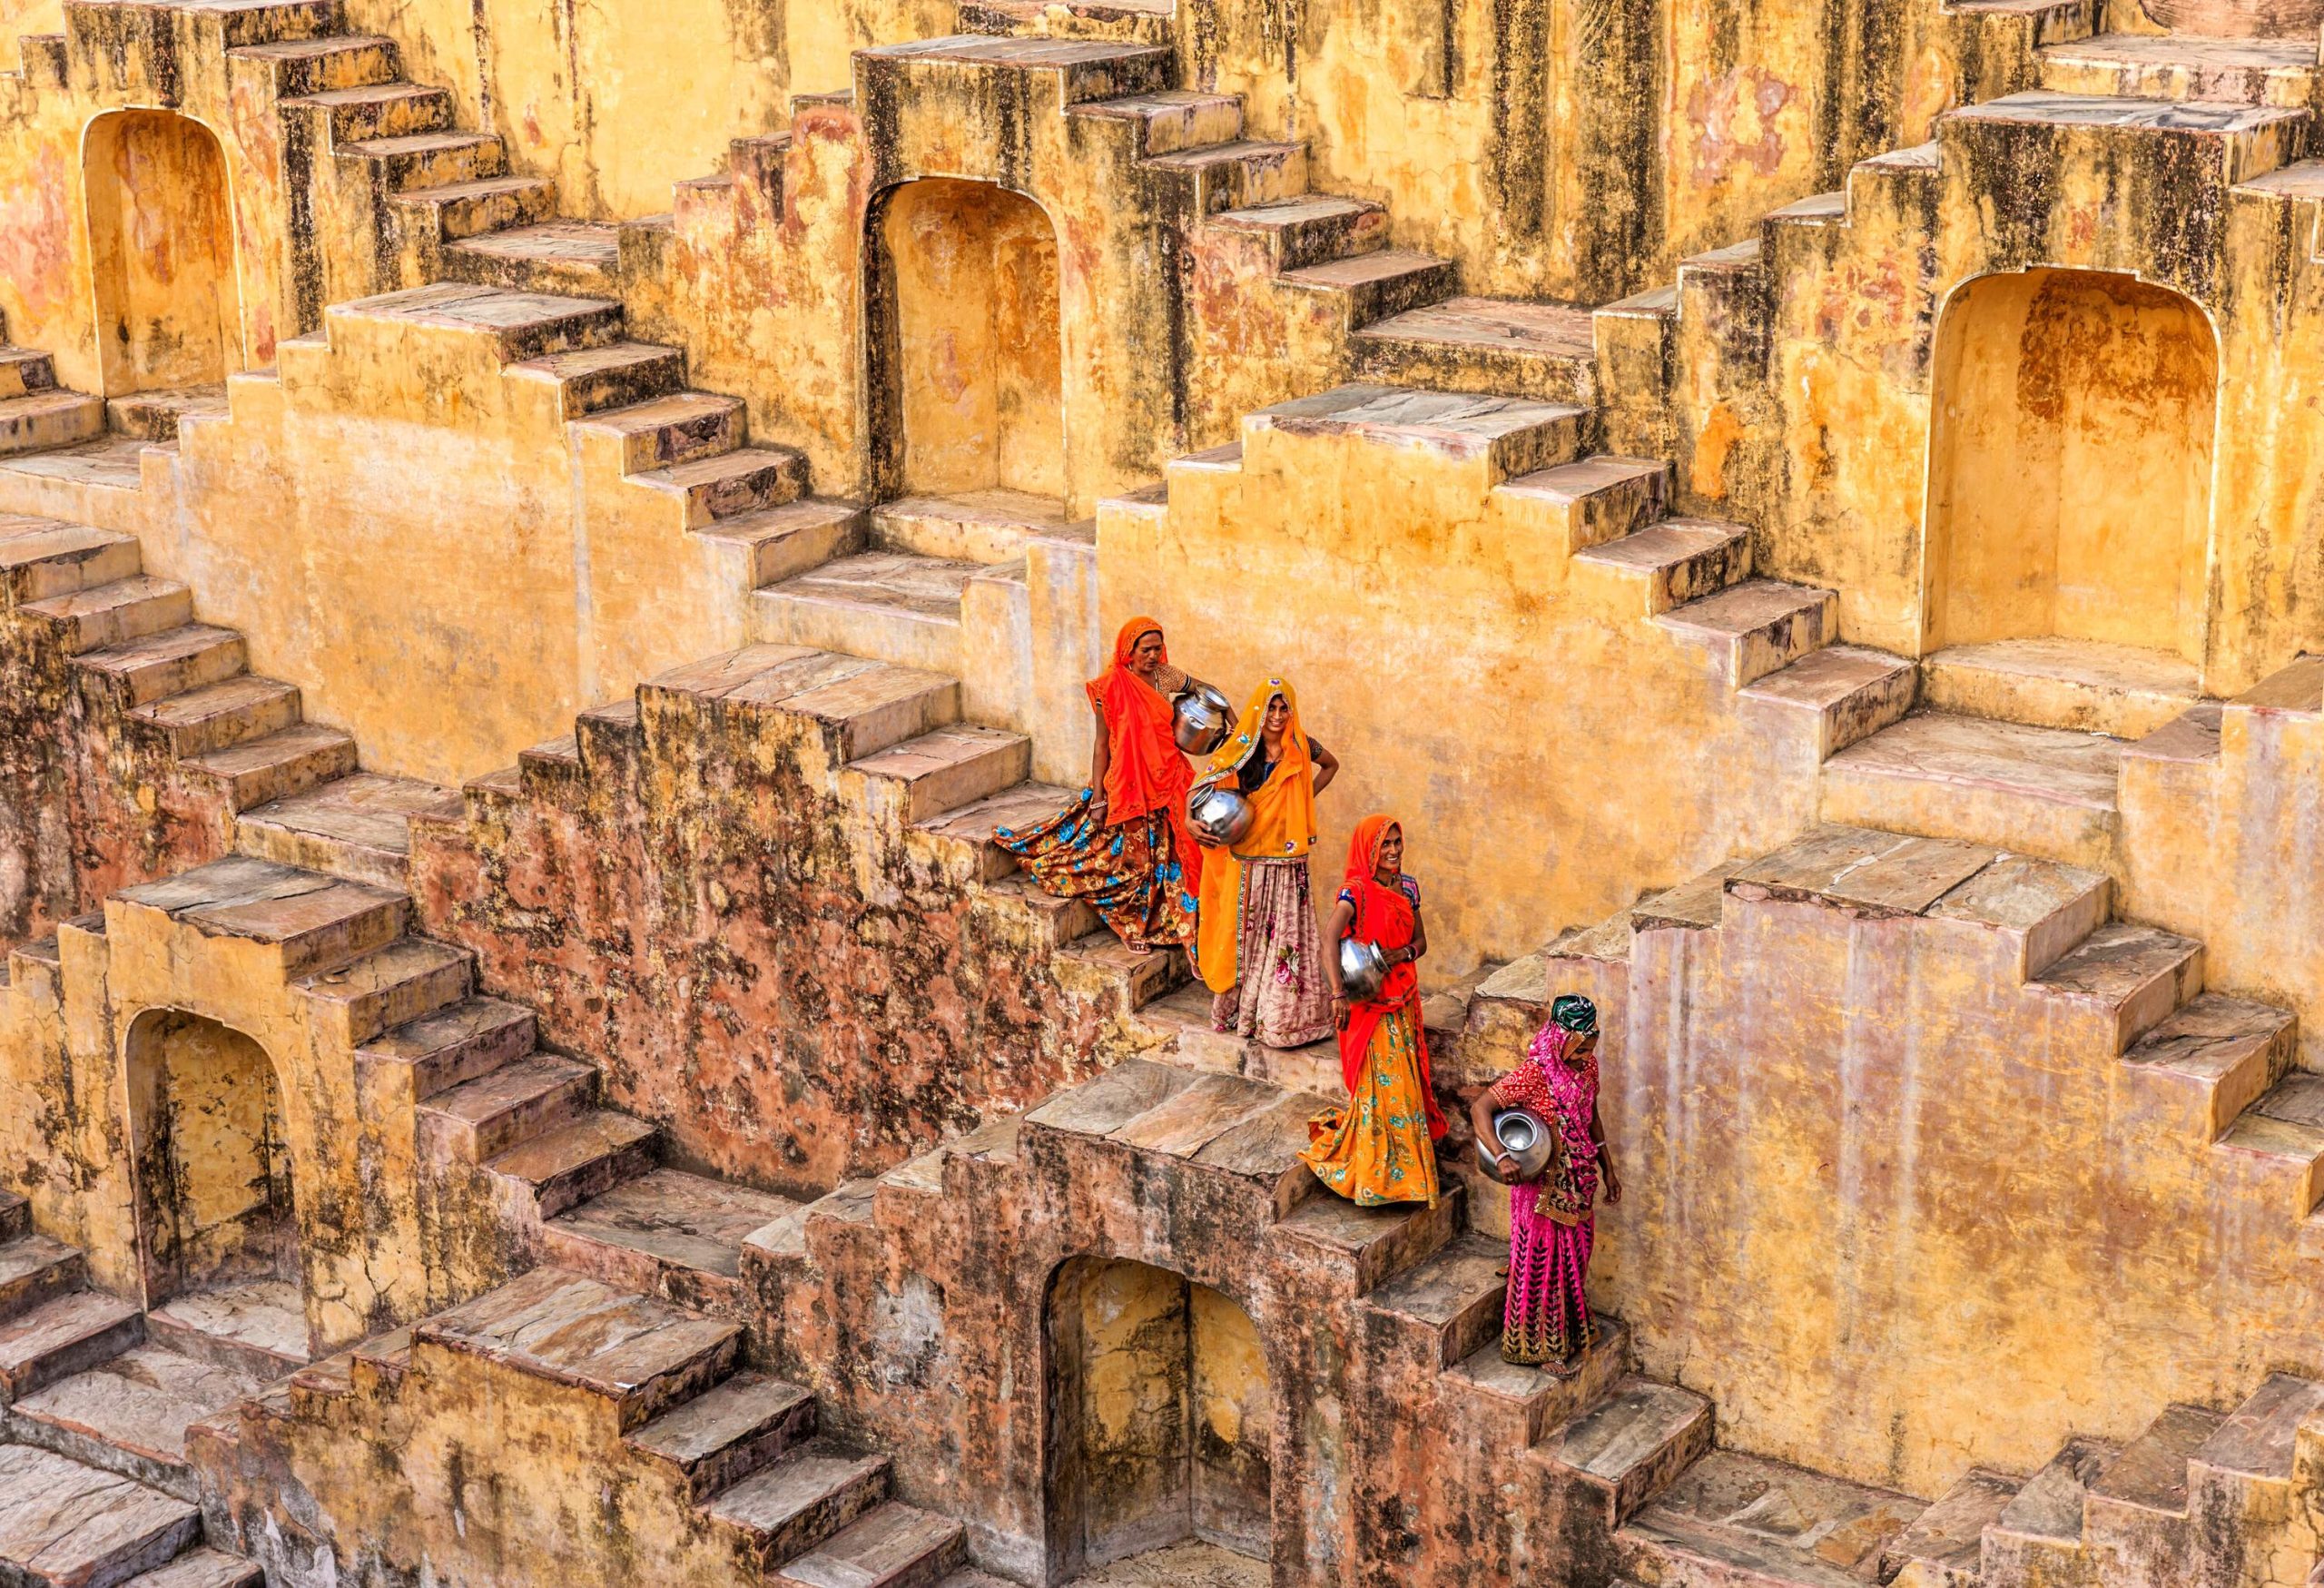 Indian women gracefully carry water from a stepwell, navigating a series of stairs, while the faded paint of the surroundings adds a touch of rustic charm.